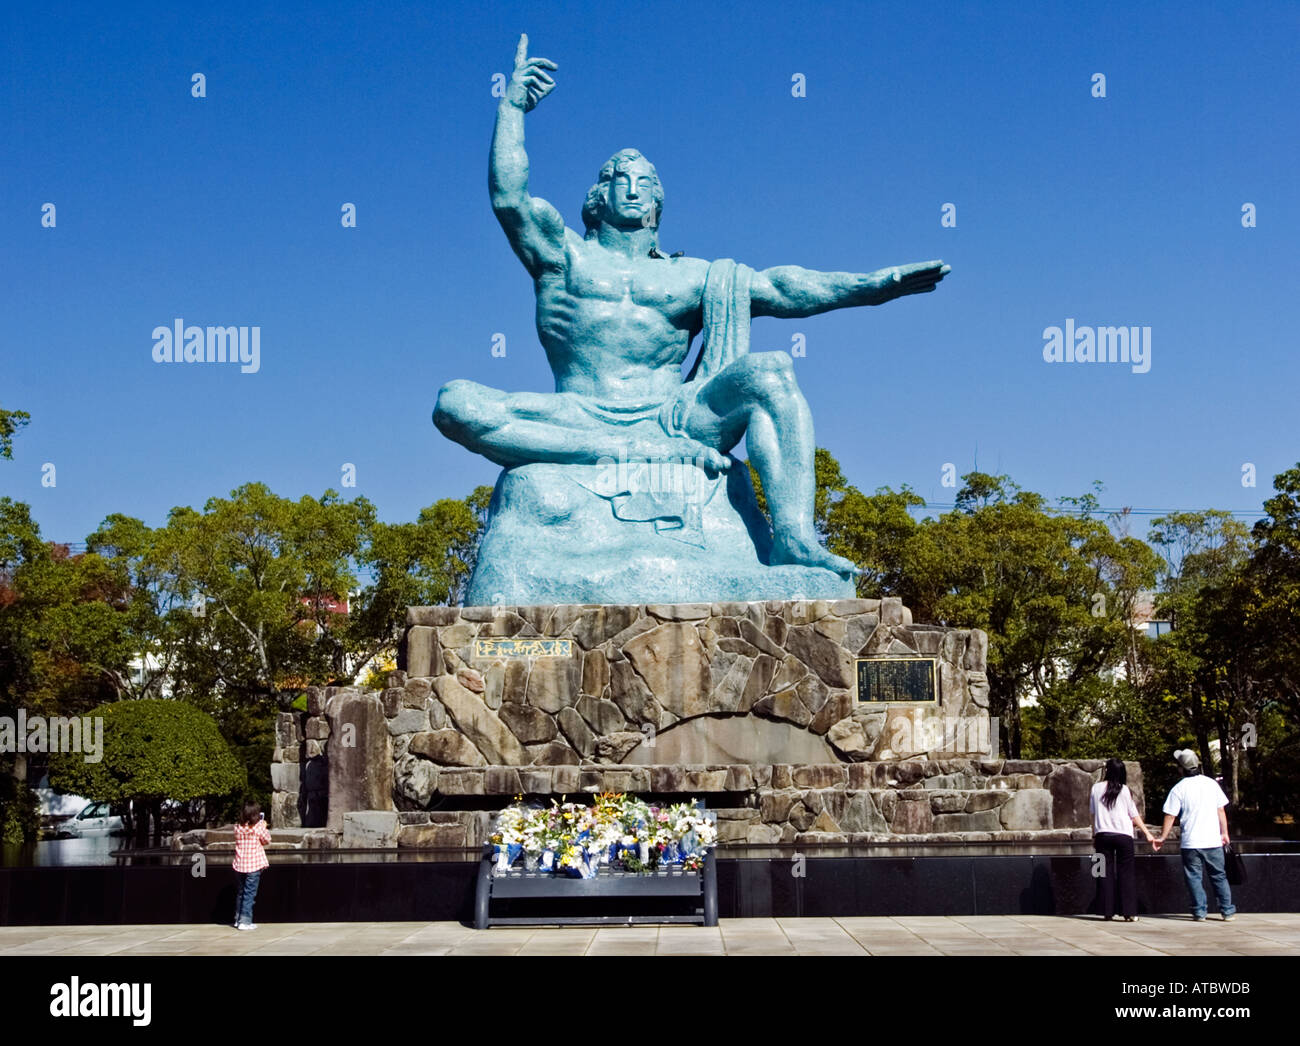 Sculpture in Peace Park Nagasaki commemorates Atomic Bomb during WWII Stock Photo